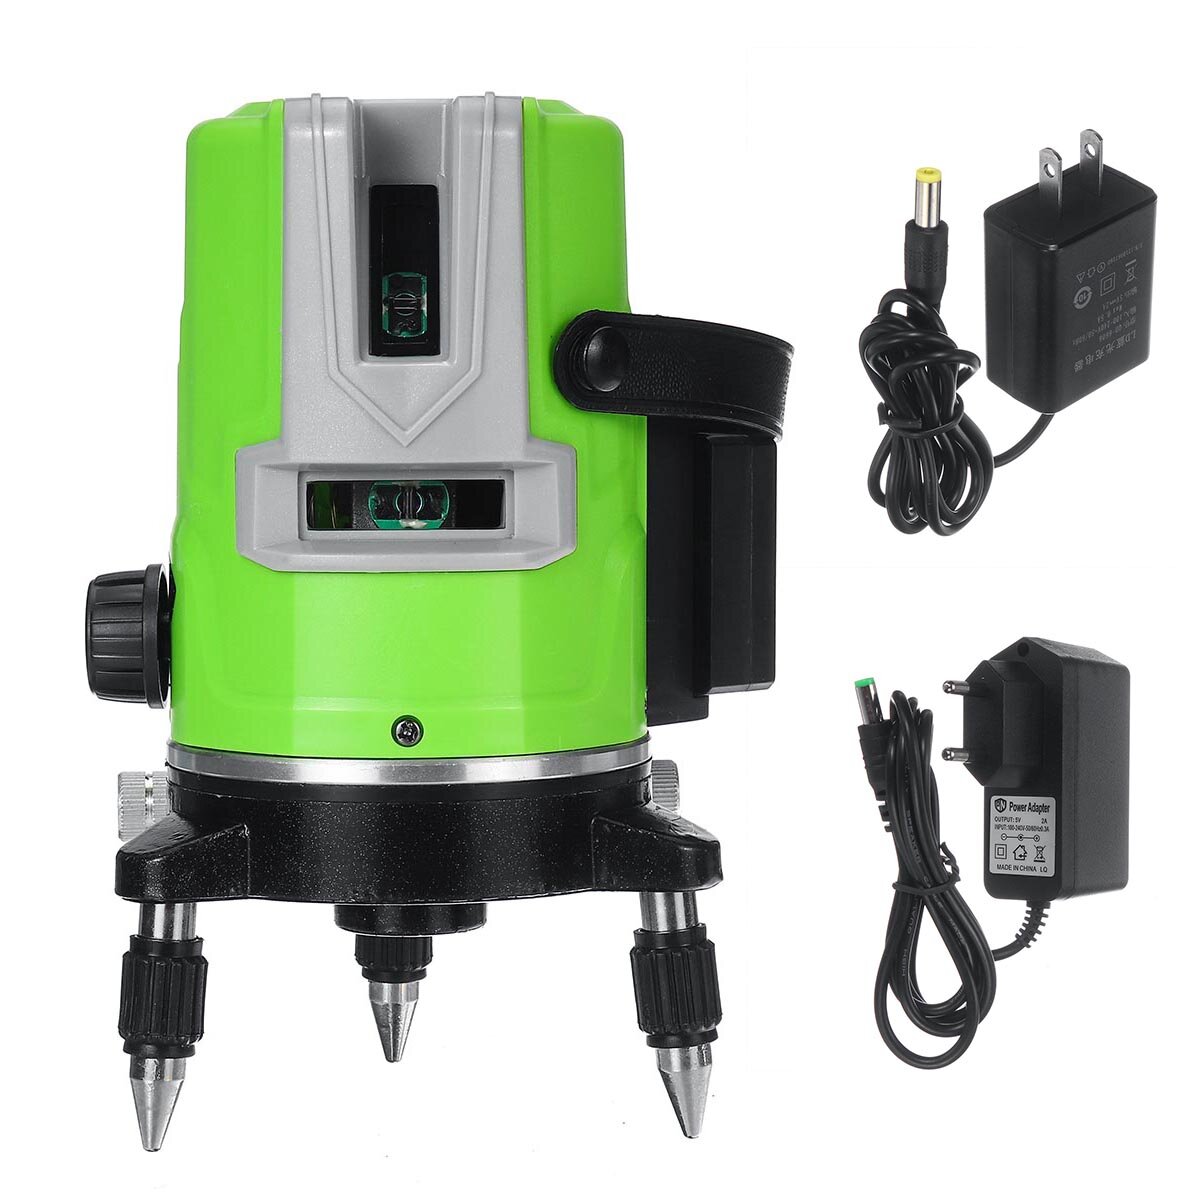 3D 5 Lines Green Laser Level Self-Leveling 360? Rotary Cross Measuring Tool